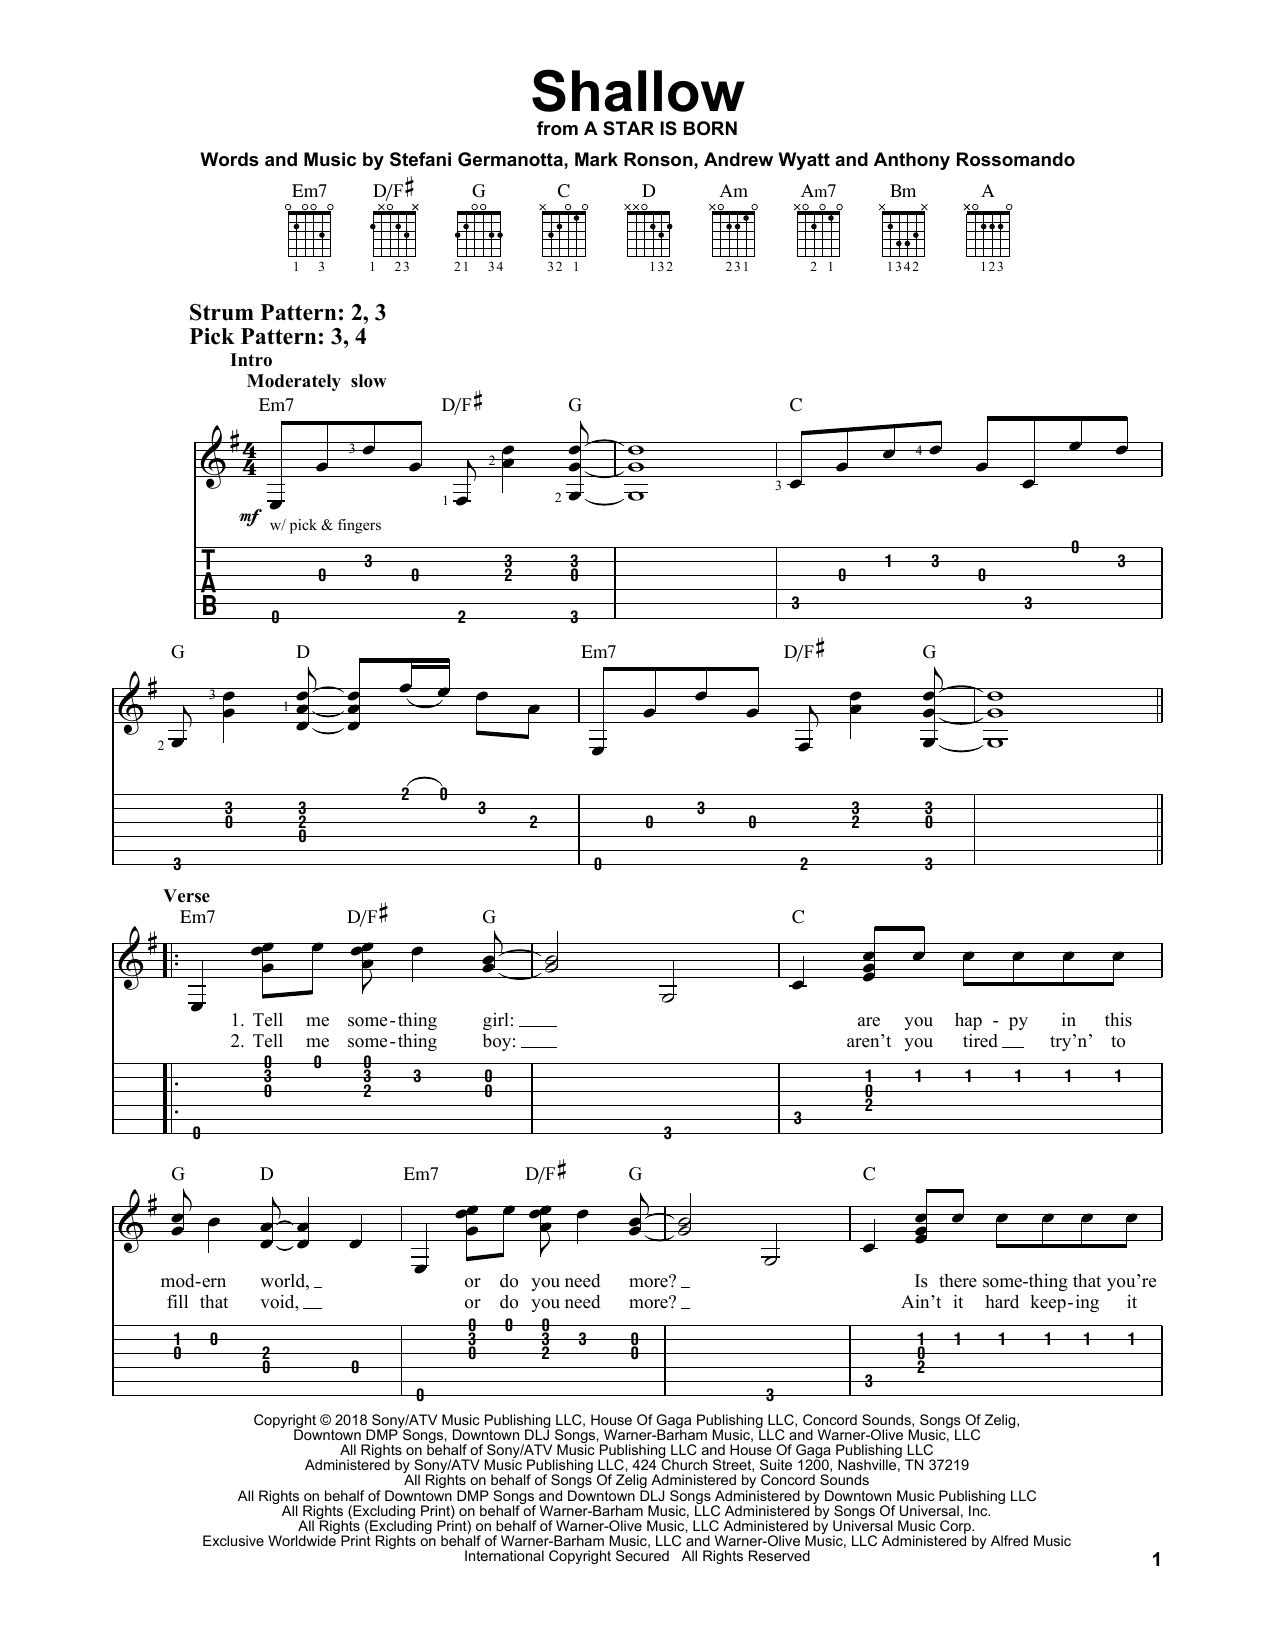 Lady Gaga And Bradley Cooper Shallow From A Star Is Born Sheet Music Notes Download